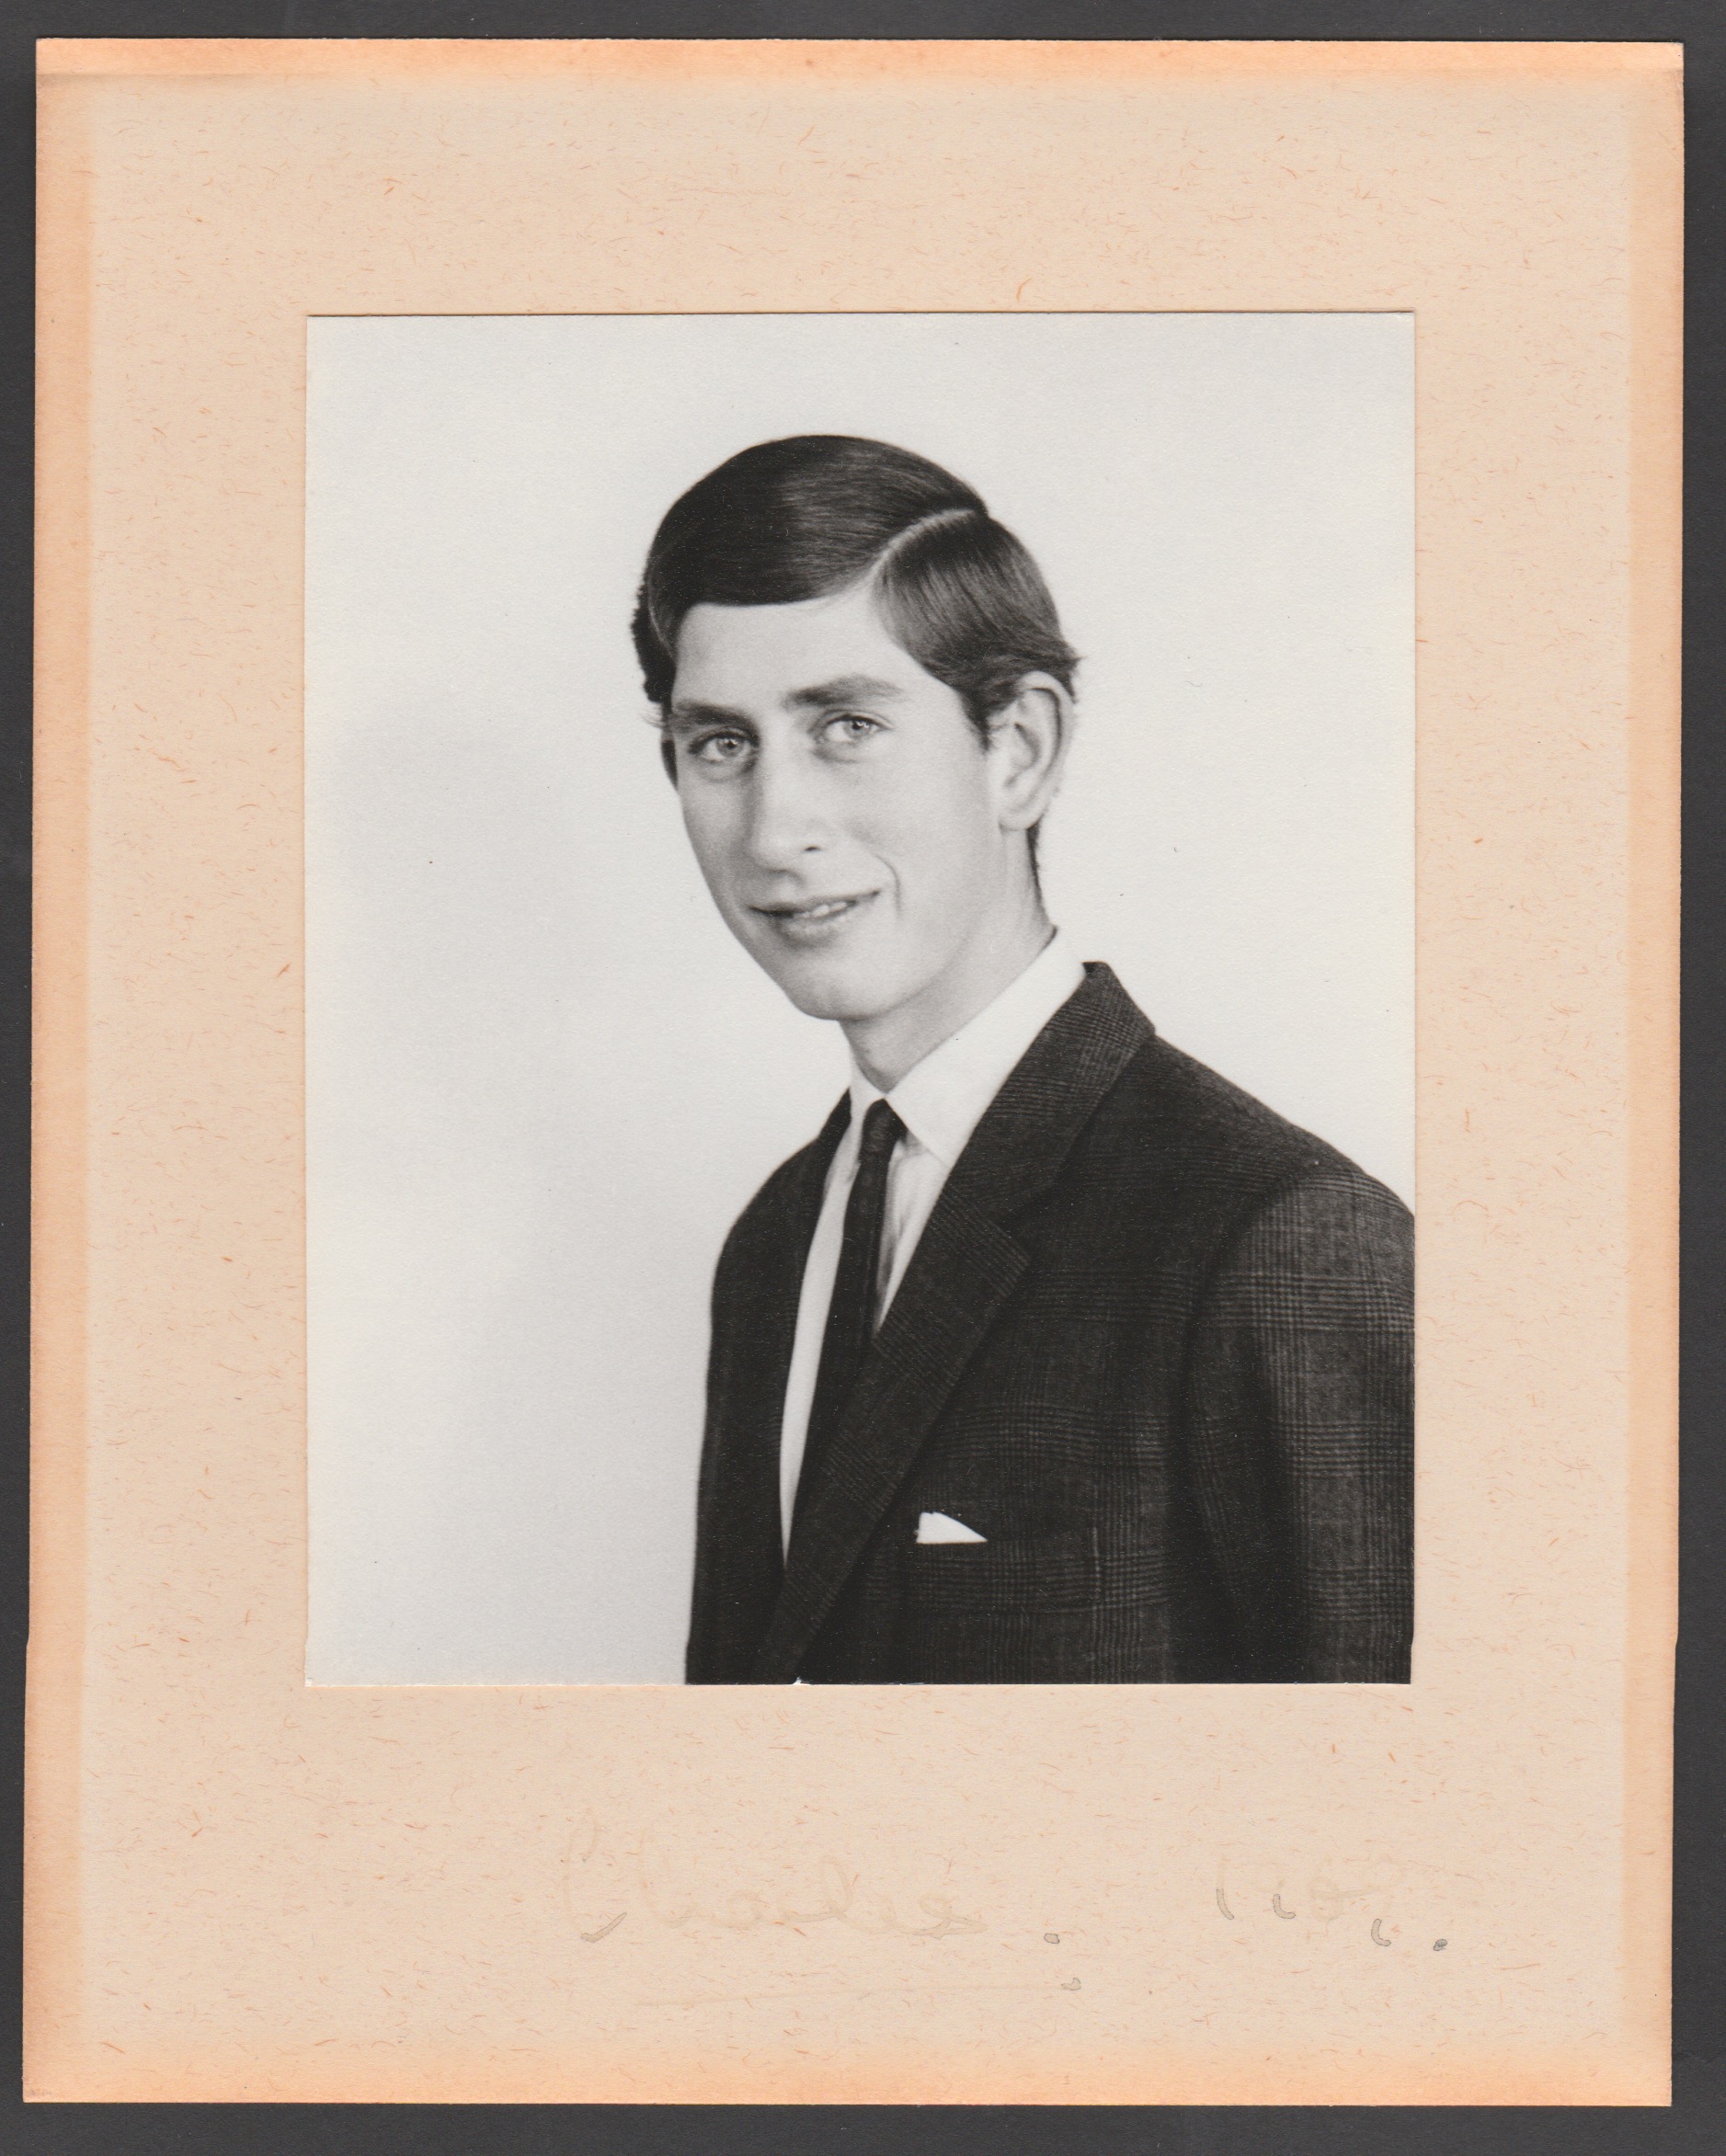 Royalty, Hrh Prince Charles Prince Of Wales Hand-Signed Photograph 1969. - Image 2 of 10